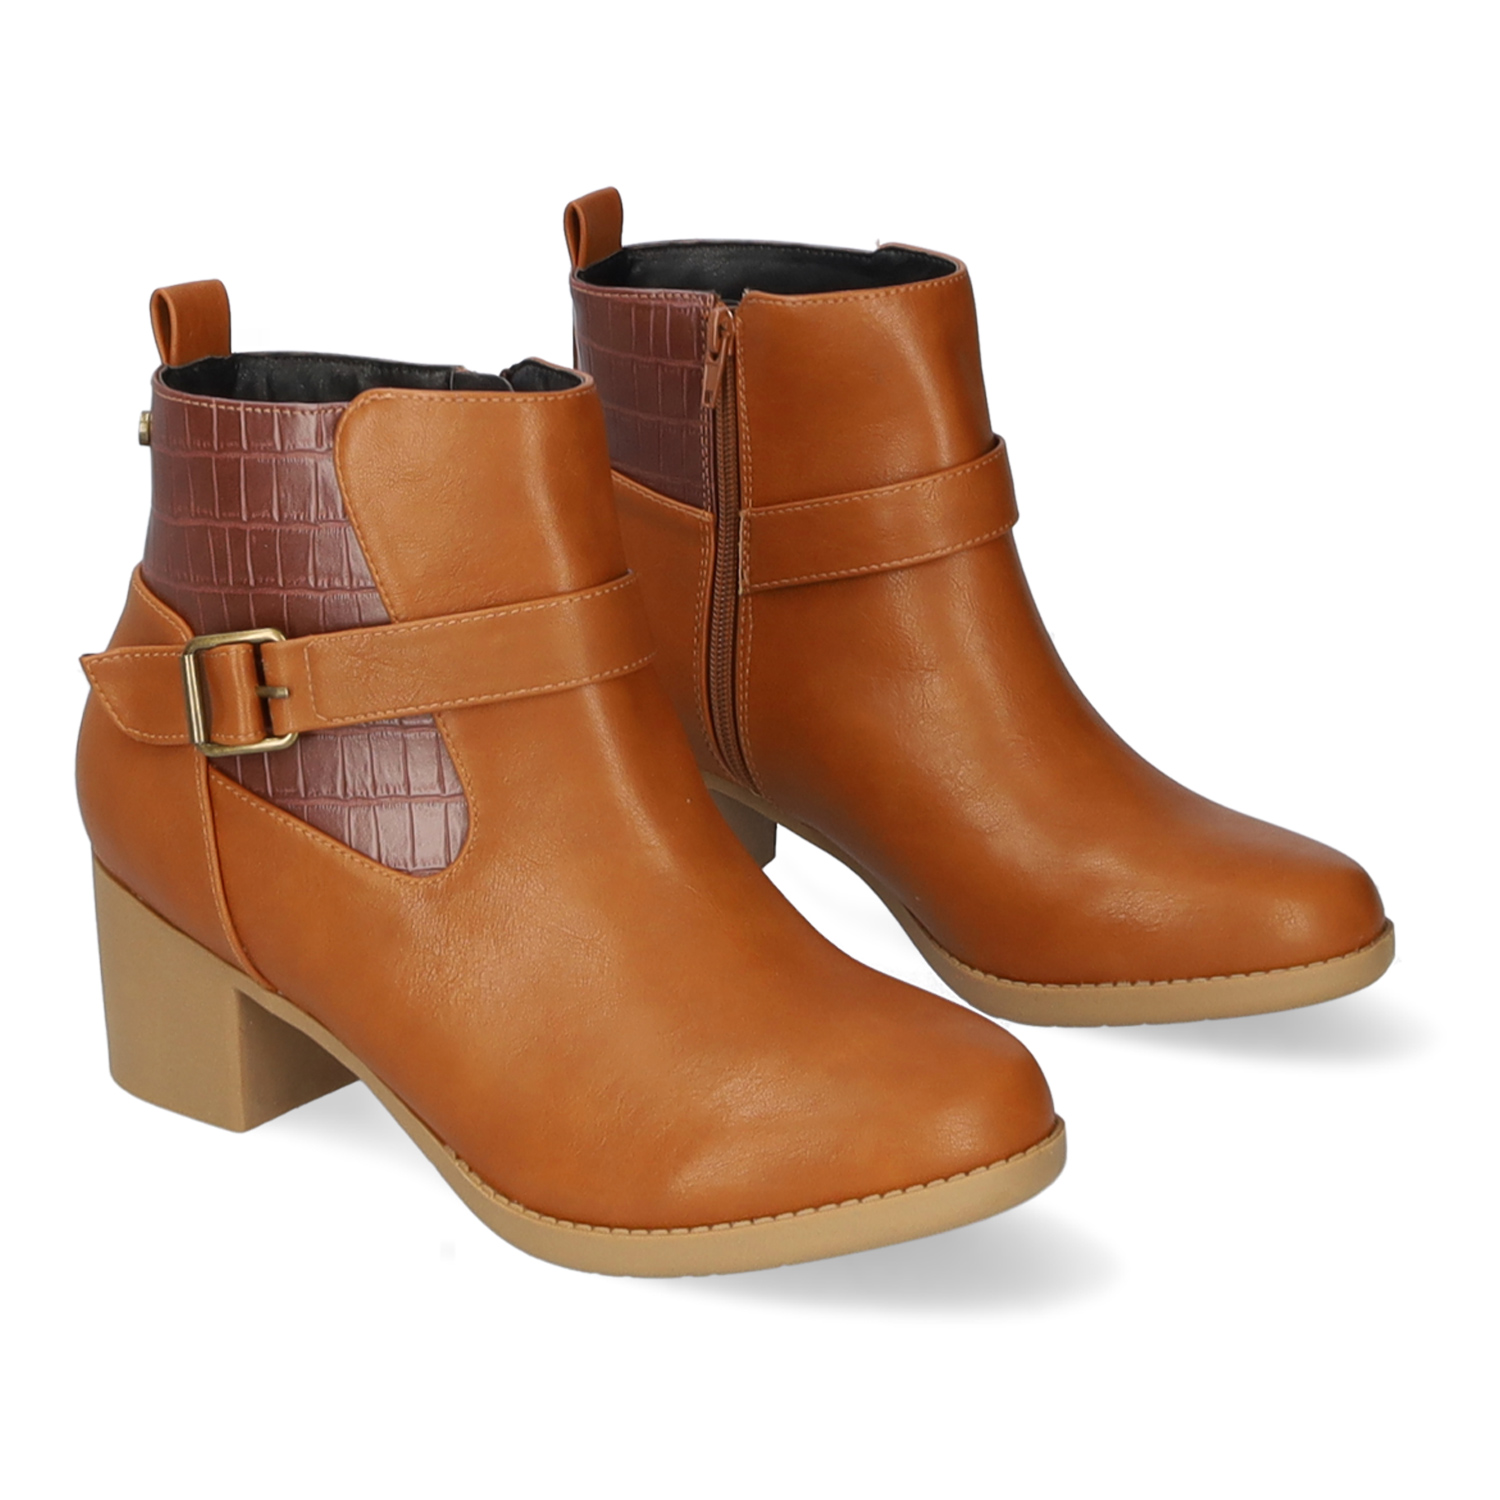 Heeled booties in camel colored faux leather 